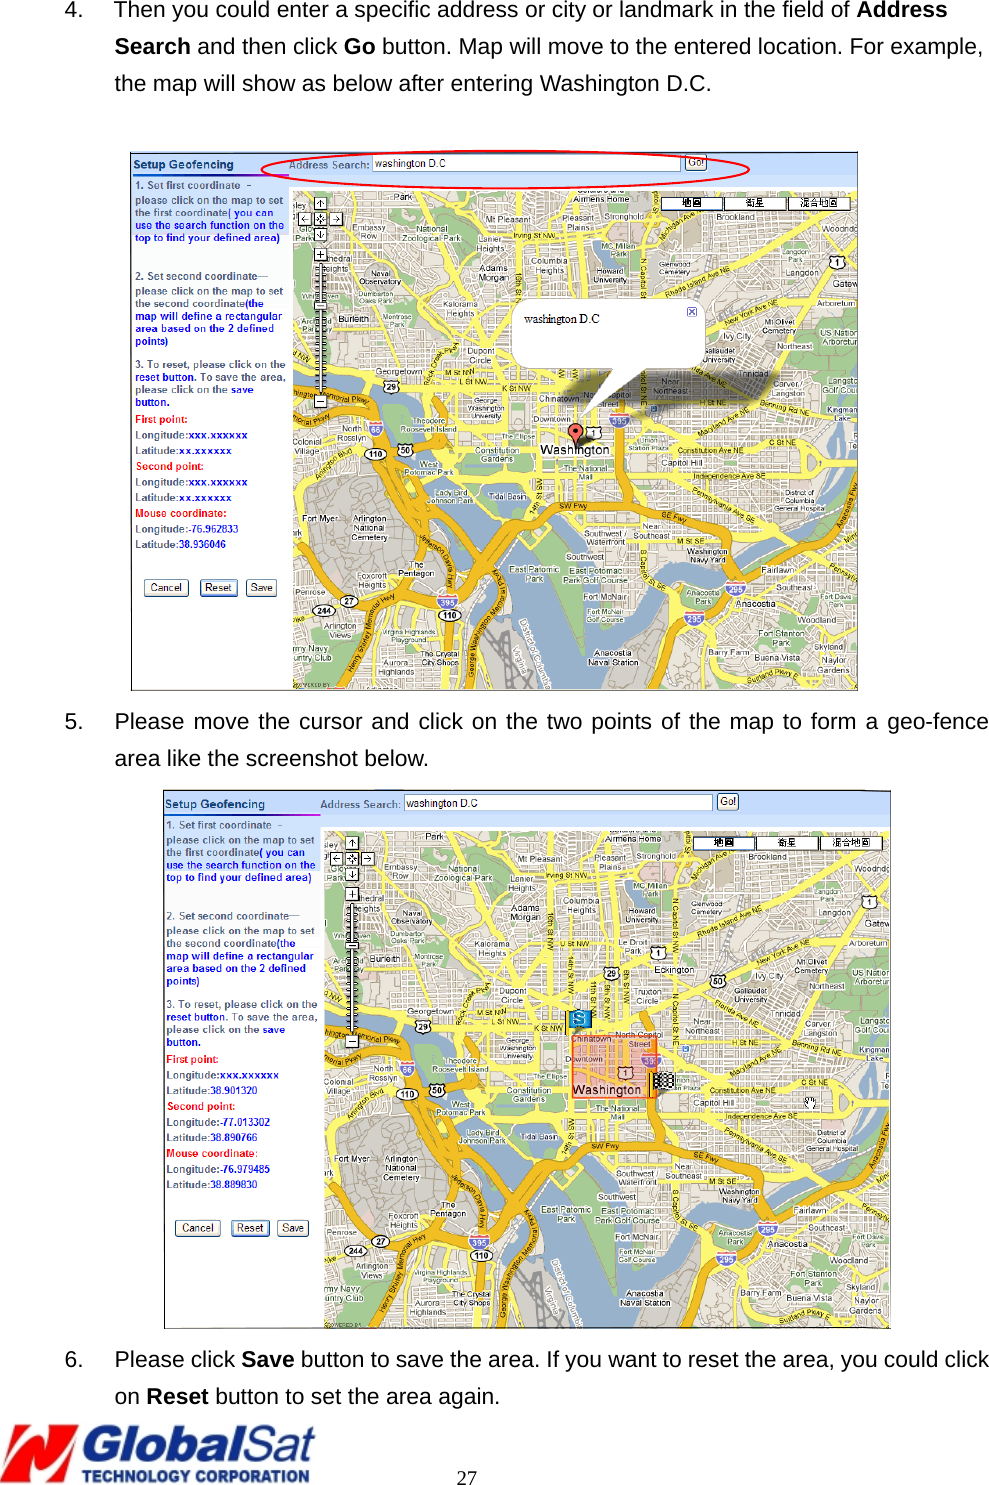                                                                                     27 4.    Then you could enter a specific address or city or landmark in the field of Address Search and then click Go button. Map will move to the entered location. For example, the map will show as below after entering Washington D.C.   5.  Please move the cursor and click on the two points of the map to form a geo-fence area like the screenshot below.  6. Please click Save button to save the area. If you want to reset the area, you could click on Reset button to set the area again. 